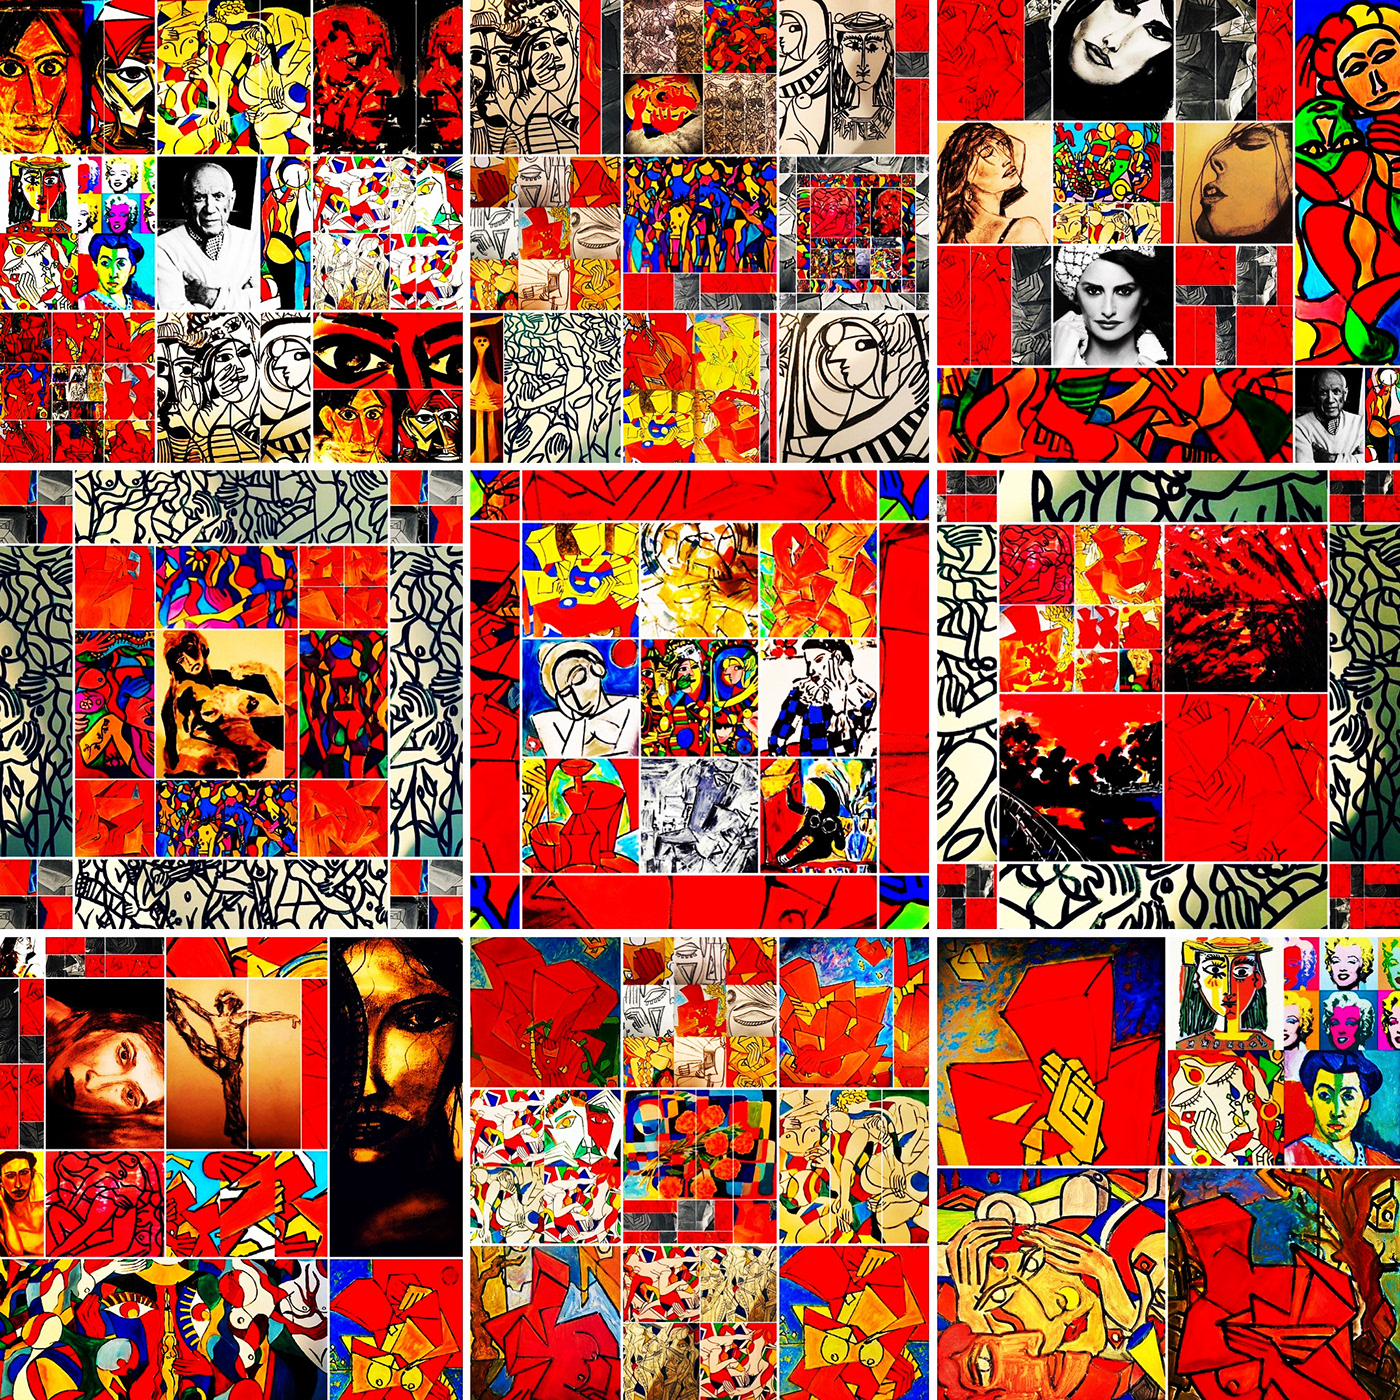 Collection of cubism artwork